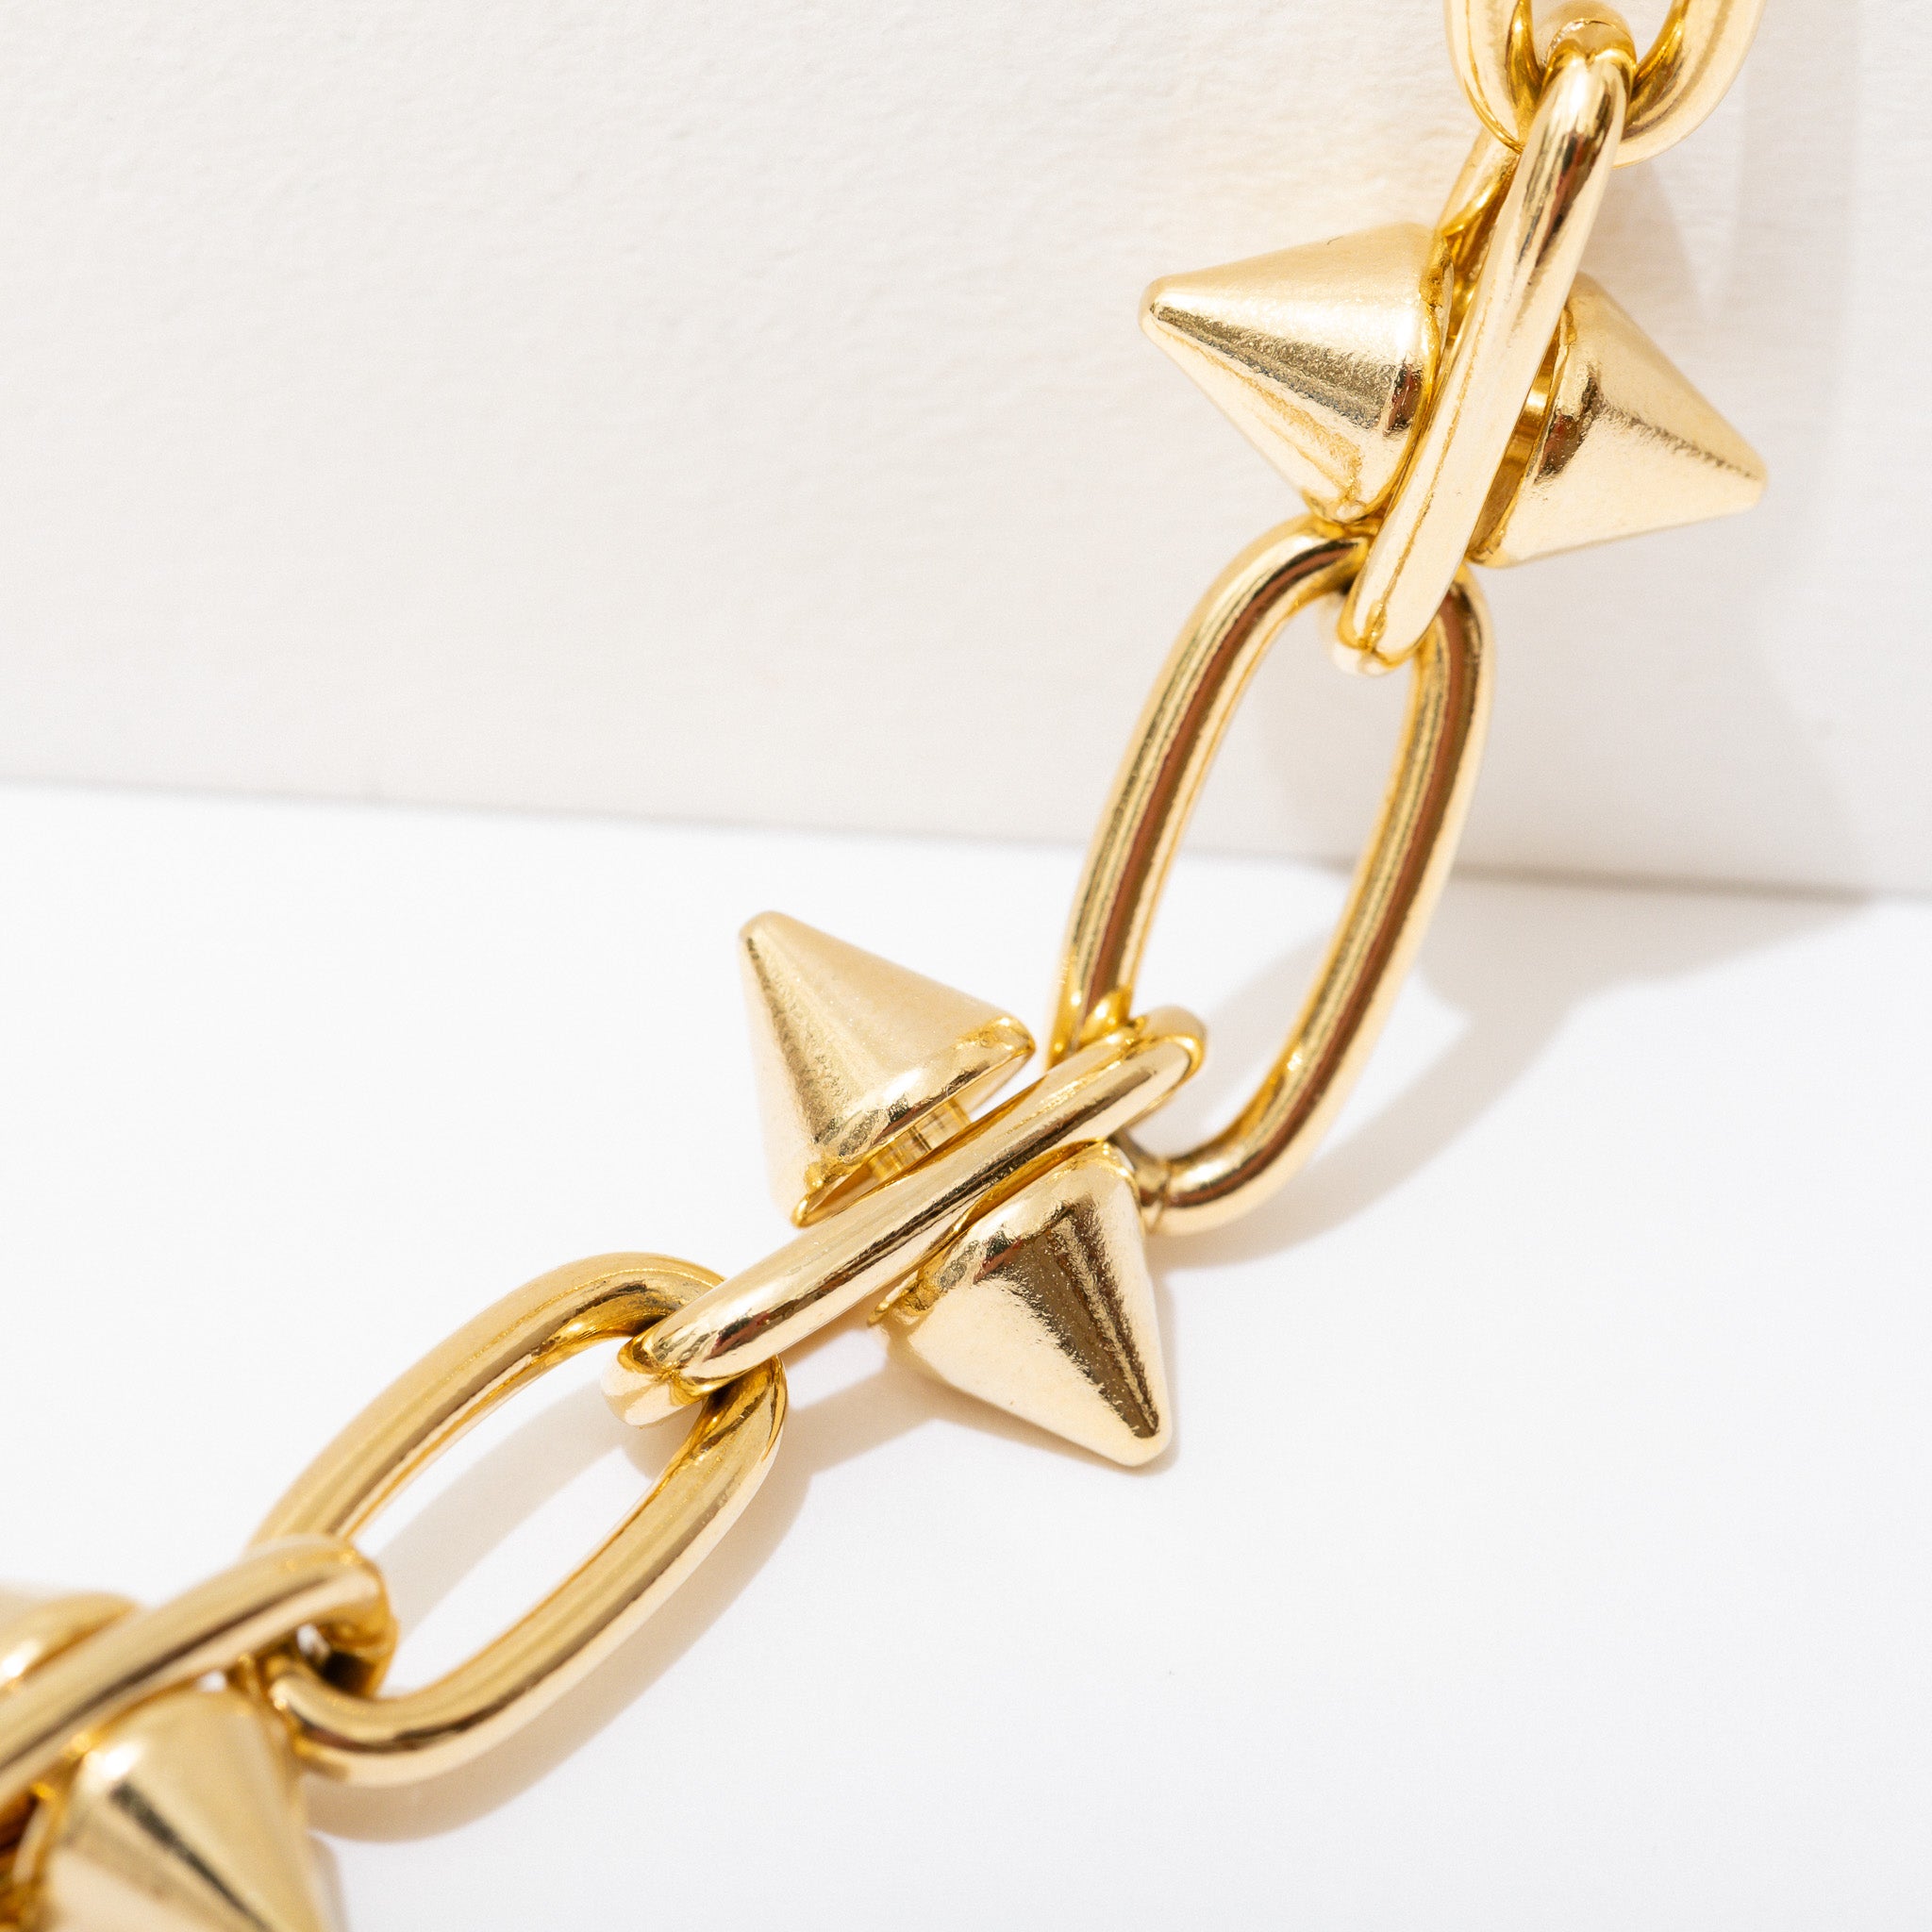 Toom Bracelet | 14K Gold Plated Spike Barbed Wire Chain | Larissa Loden 14K Gold Plate